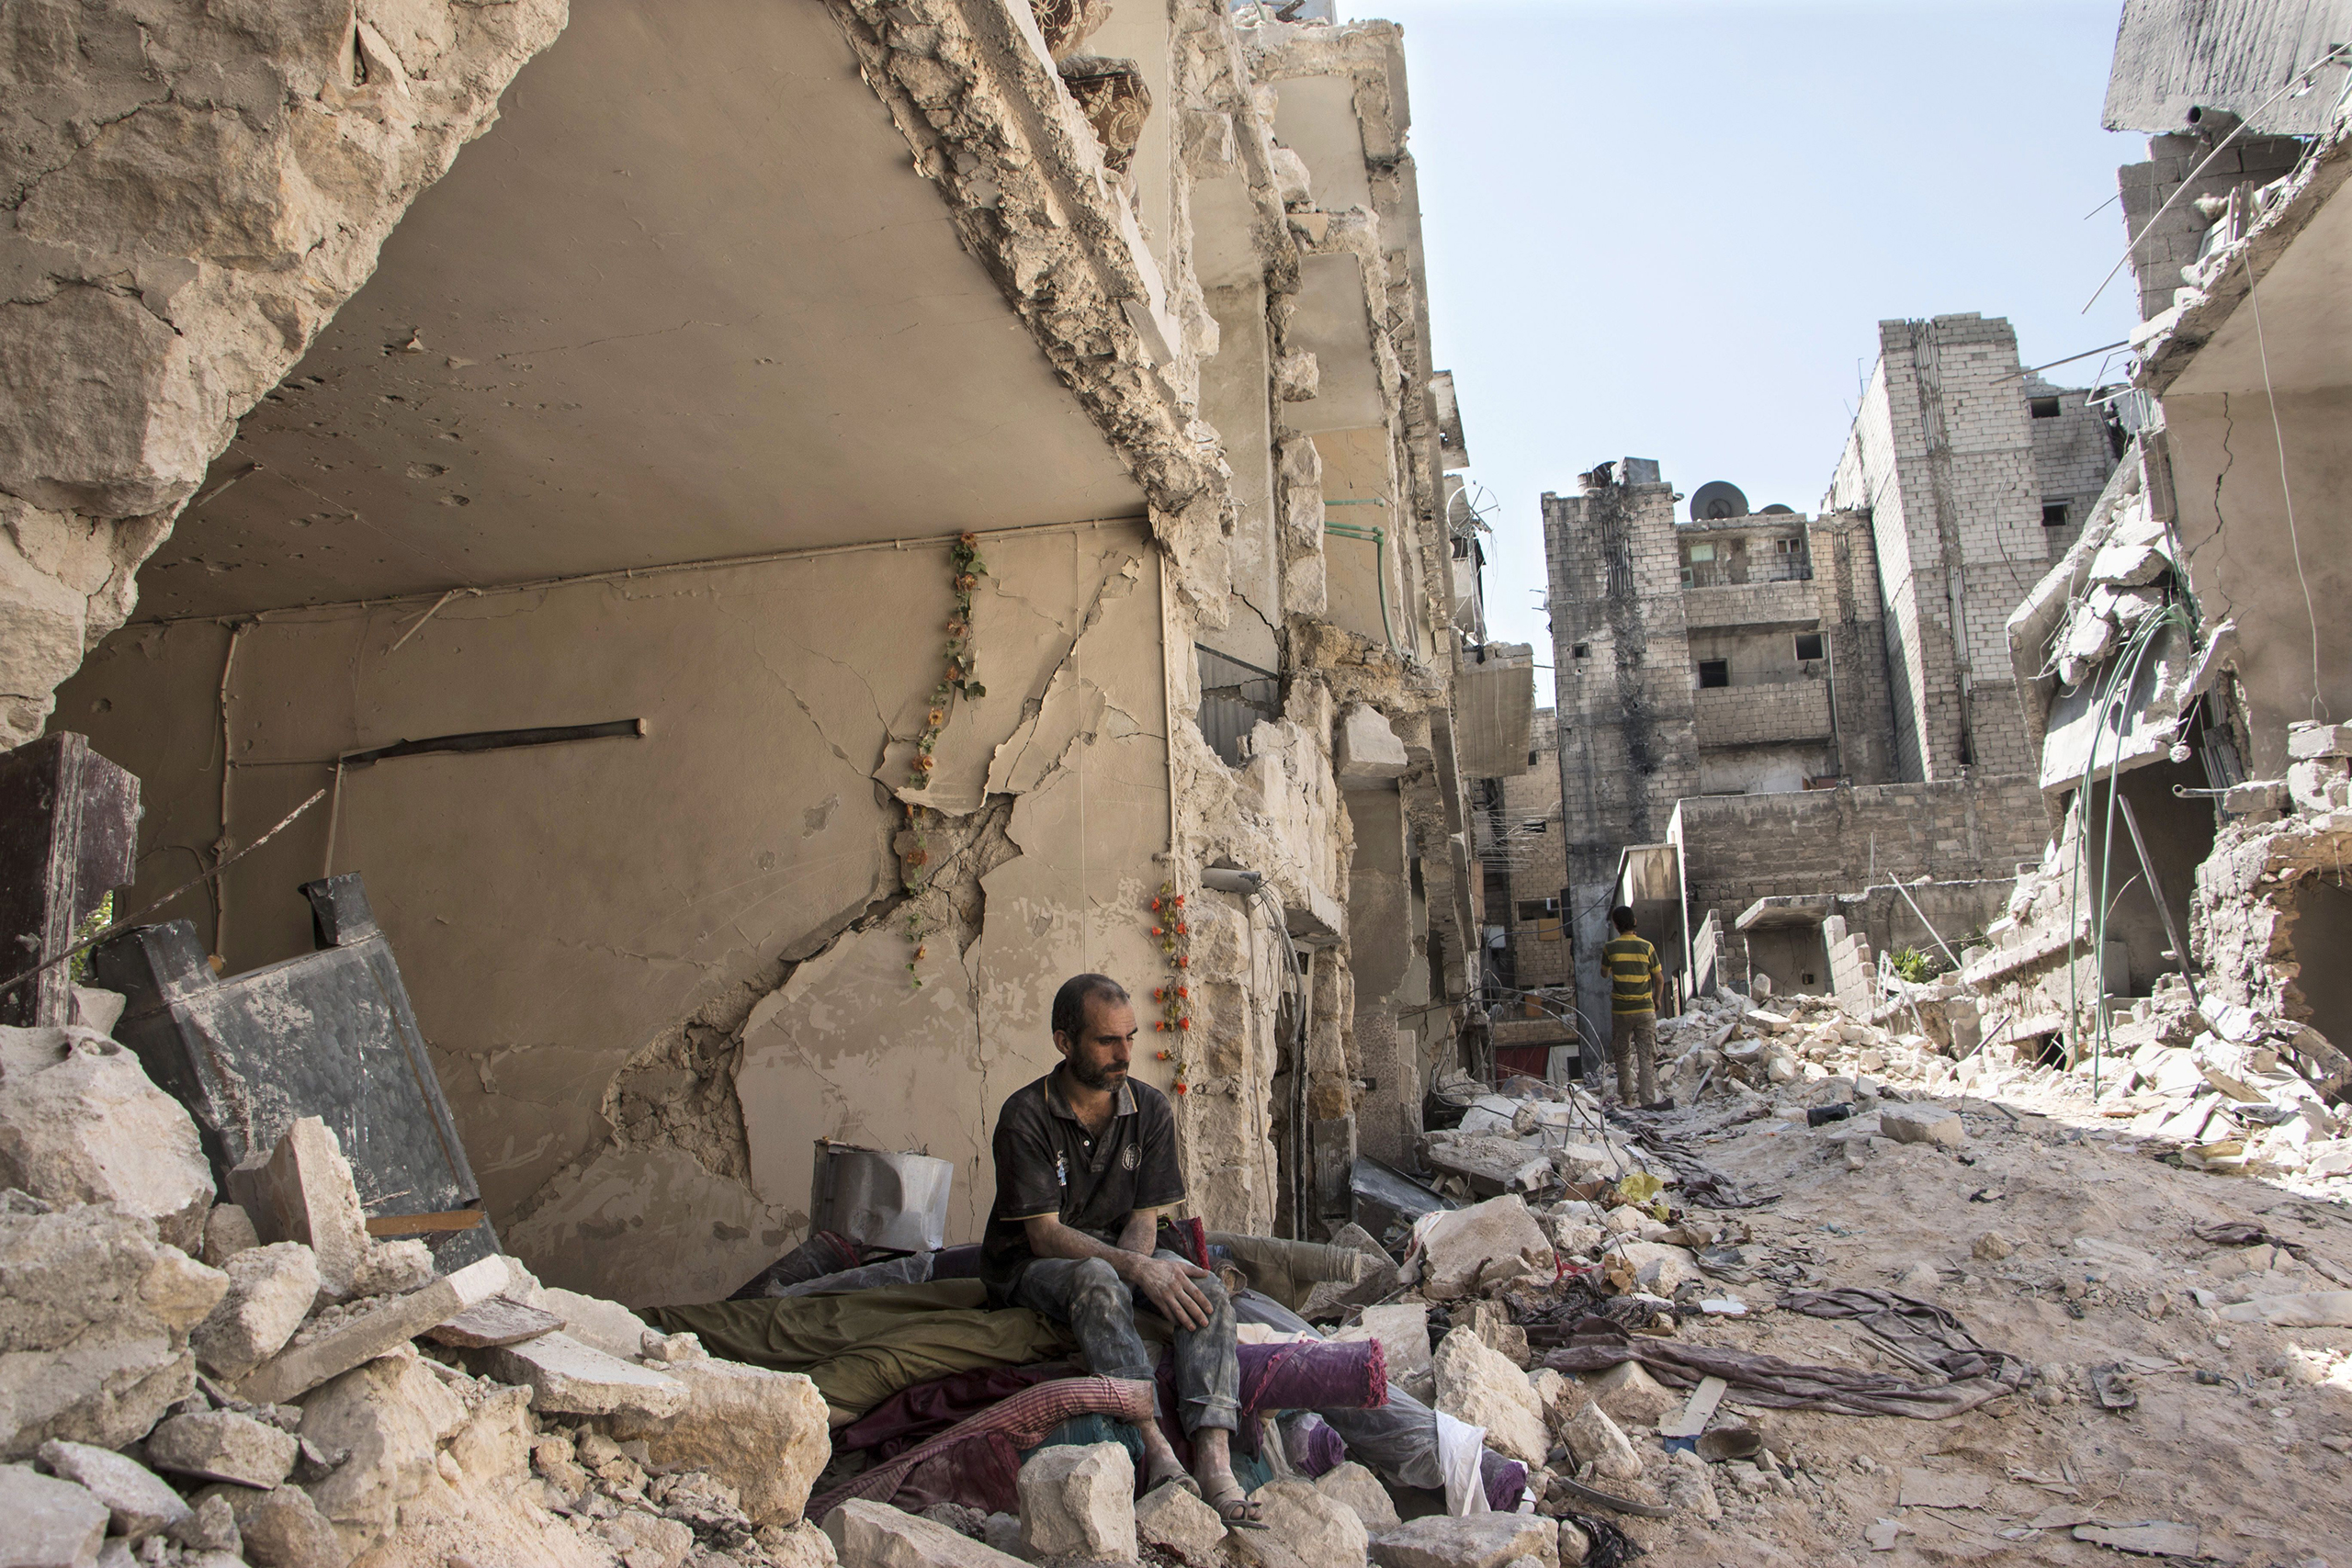 A Syrian man sits in the rubble following a barrel bomb attack the previous day on the rebel-held neighborhood of al-Mashad in Aleppo on Sept. 17, 2015. (Karam al-Masri—AFP/Getty Images)